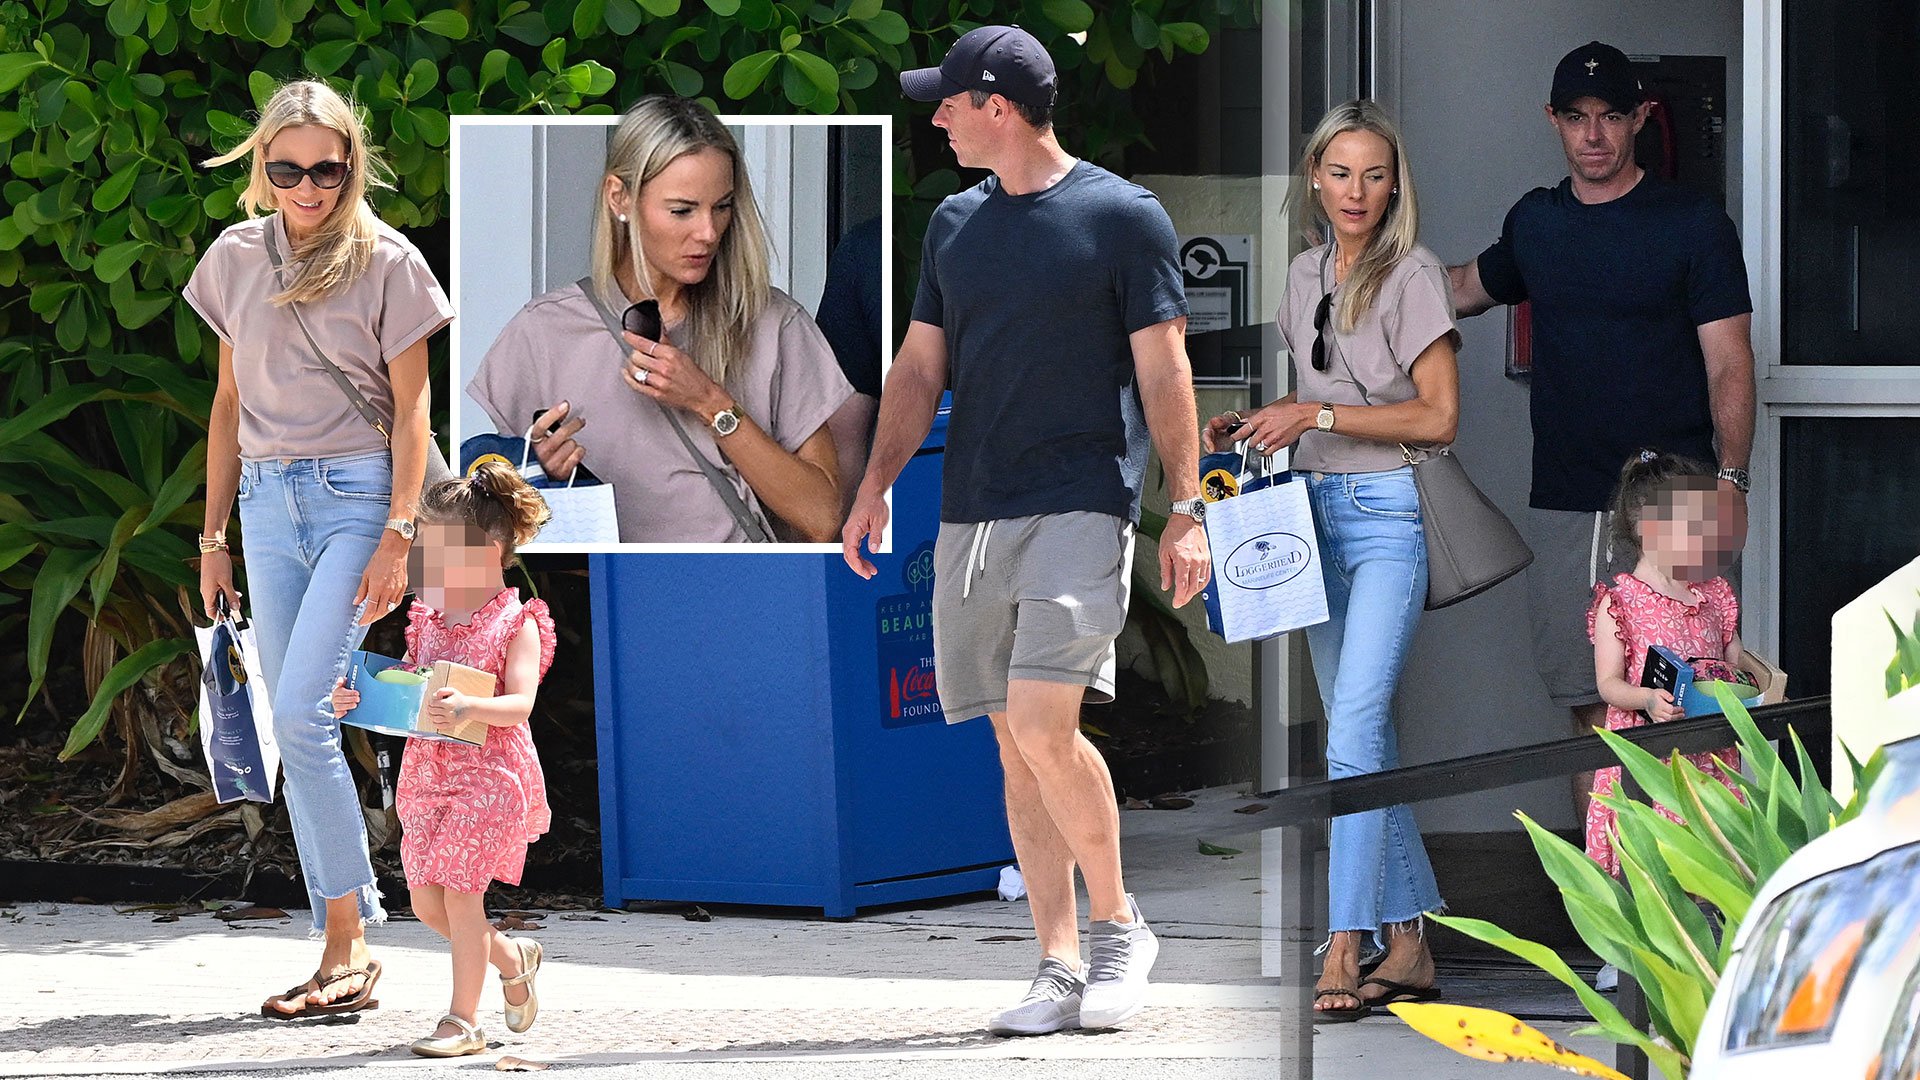 Rory McIlroy seen with wife Erica Stoll for first time since divorce U-turn as golfer gets over US Open heartbreak